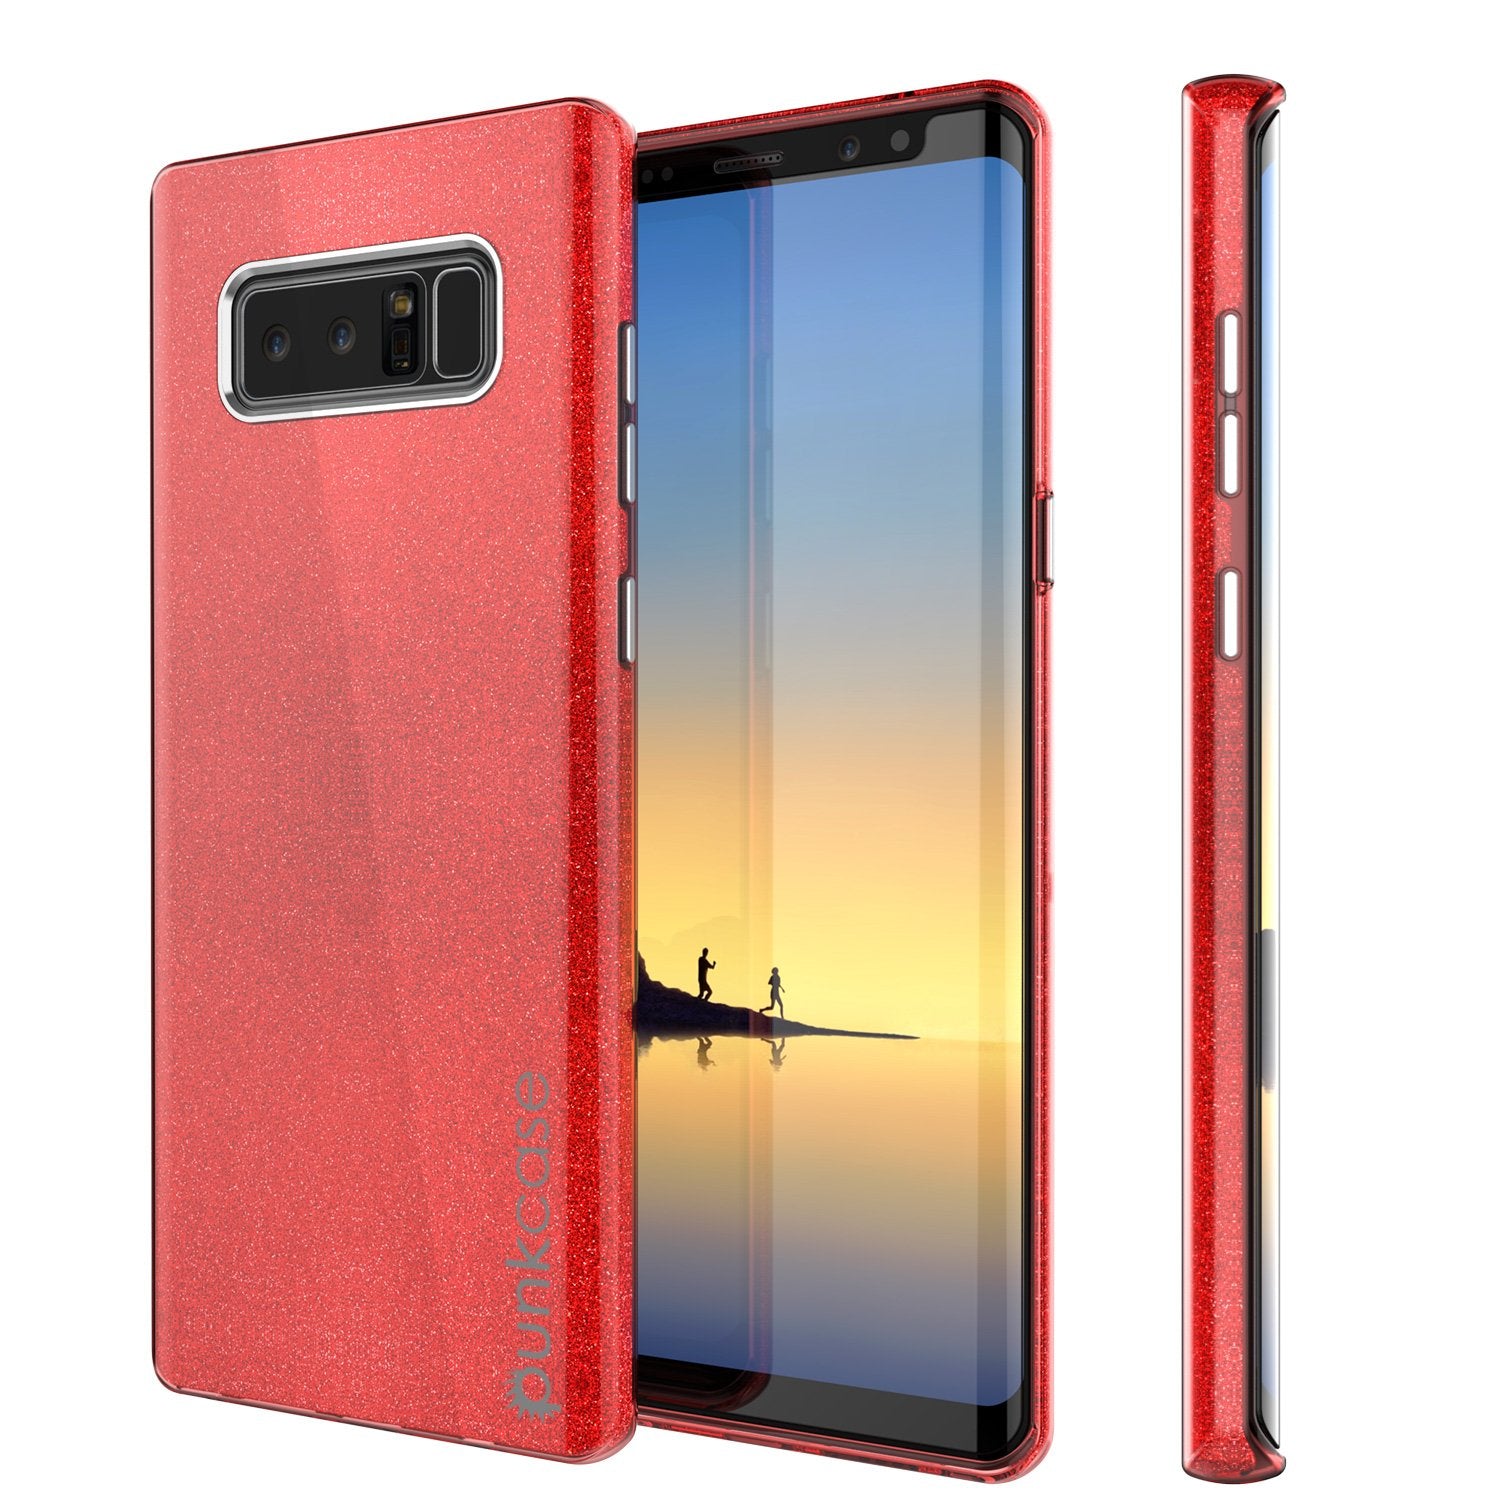 Galaxy Note 8 Case, Punkcase Galactic 2.0 Series Ultra Slim [Red]